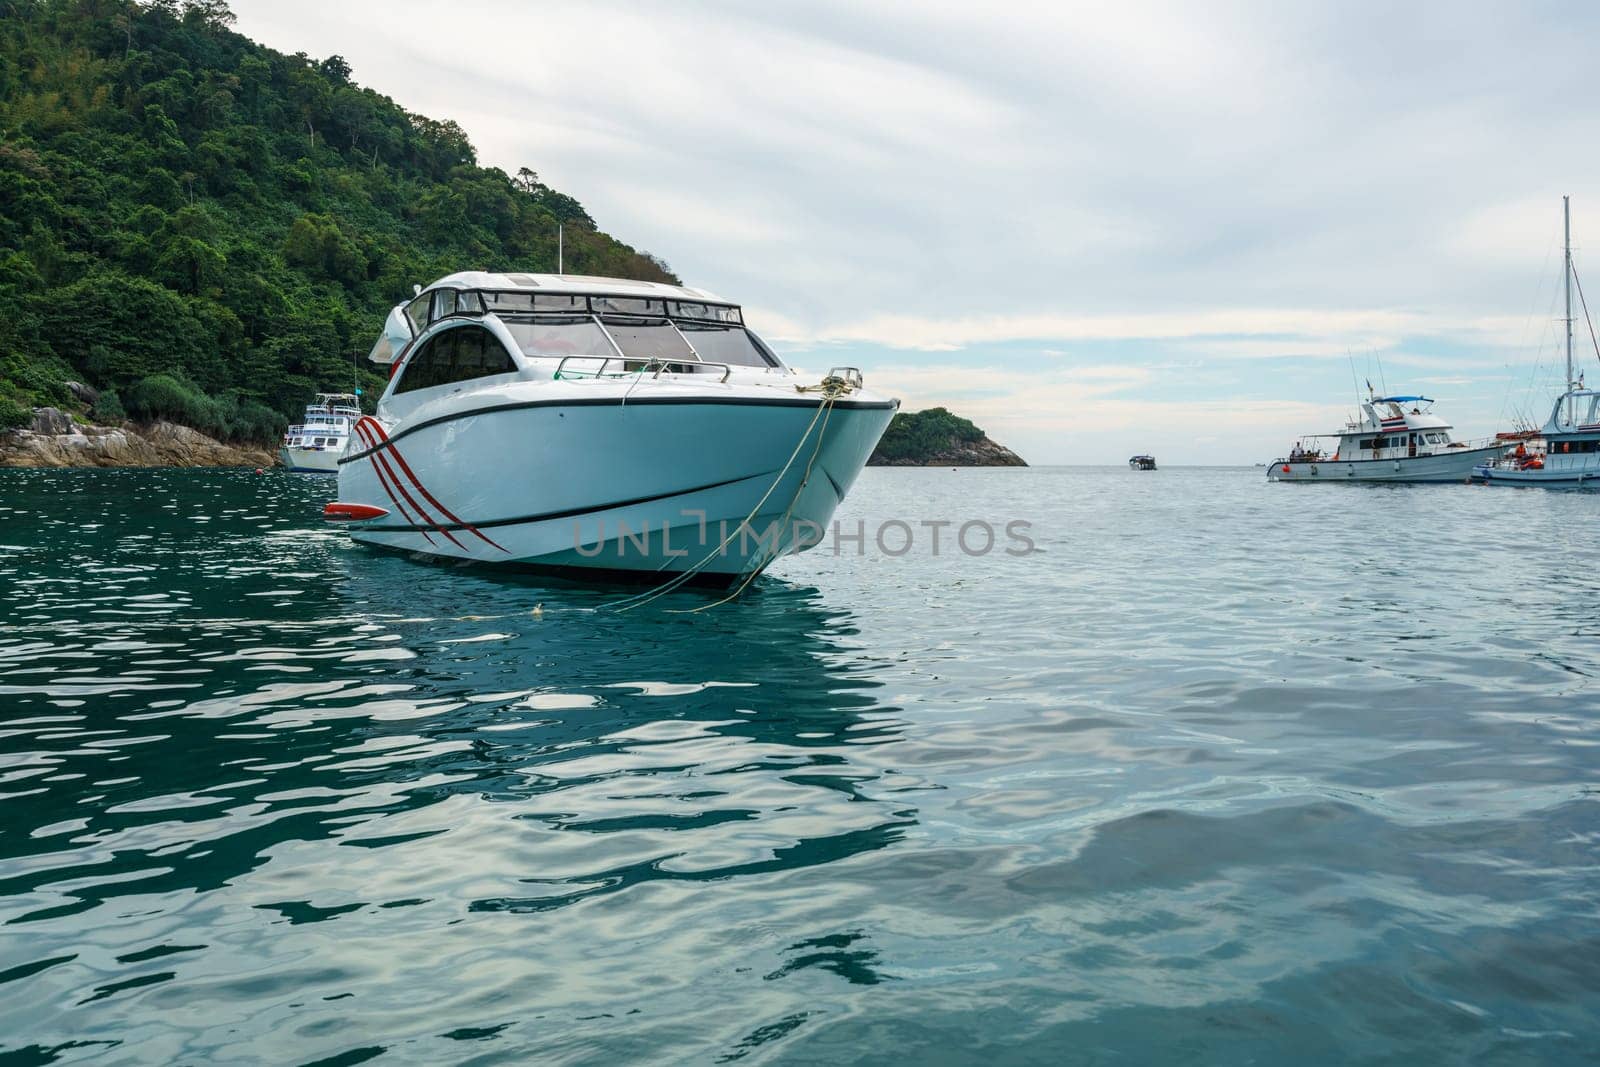 Seascape and View of boats in bay. Phuket, Thailand